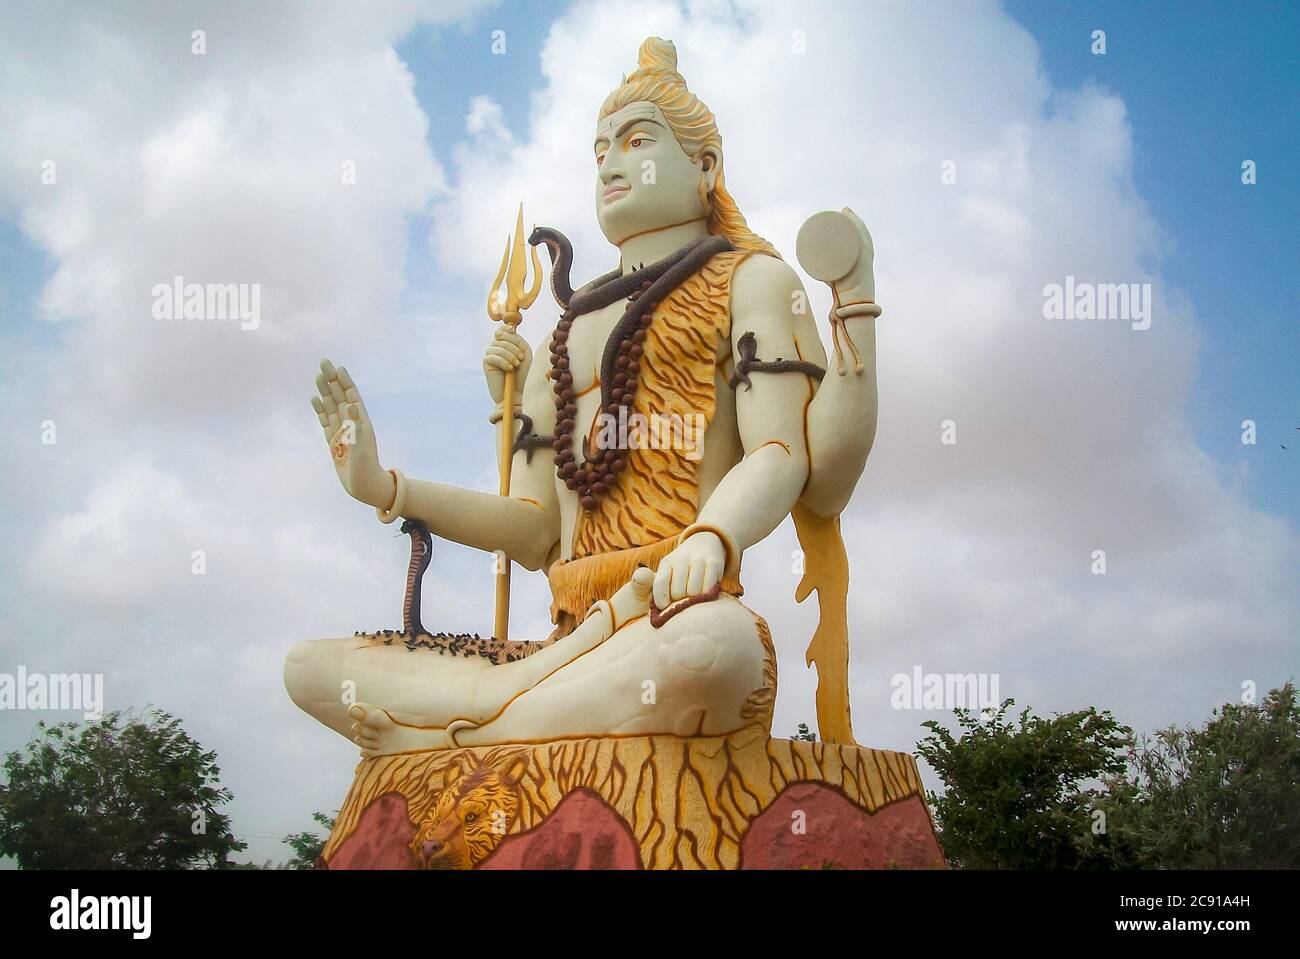 Statue Of Lord Shiva In India. Stock Photo